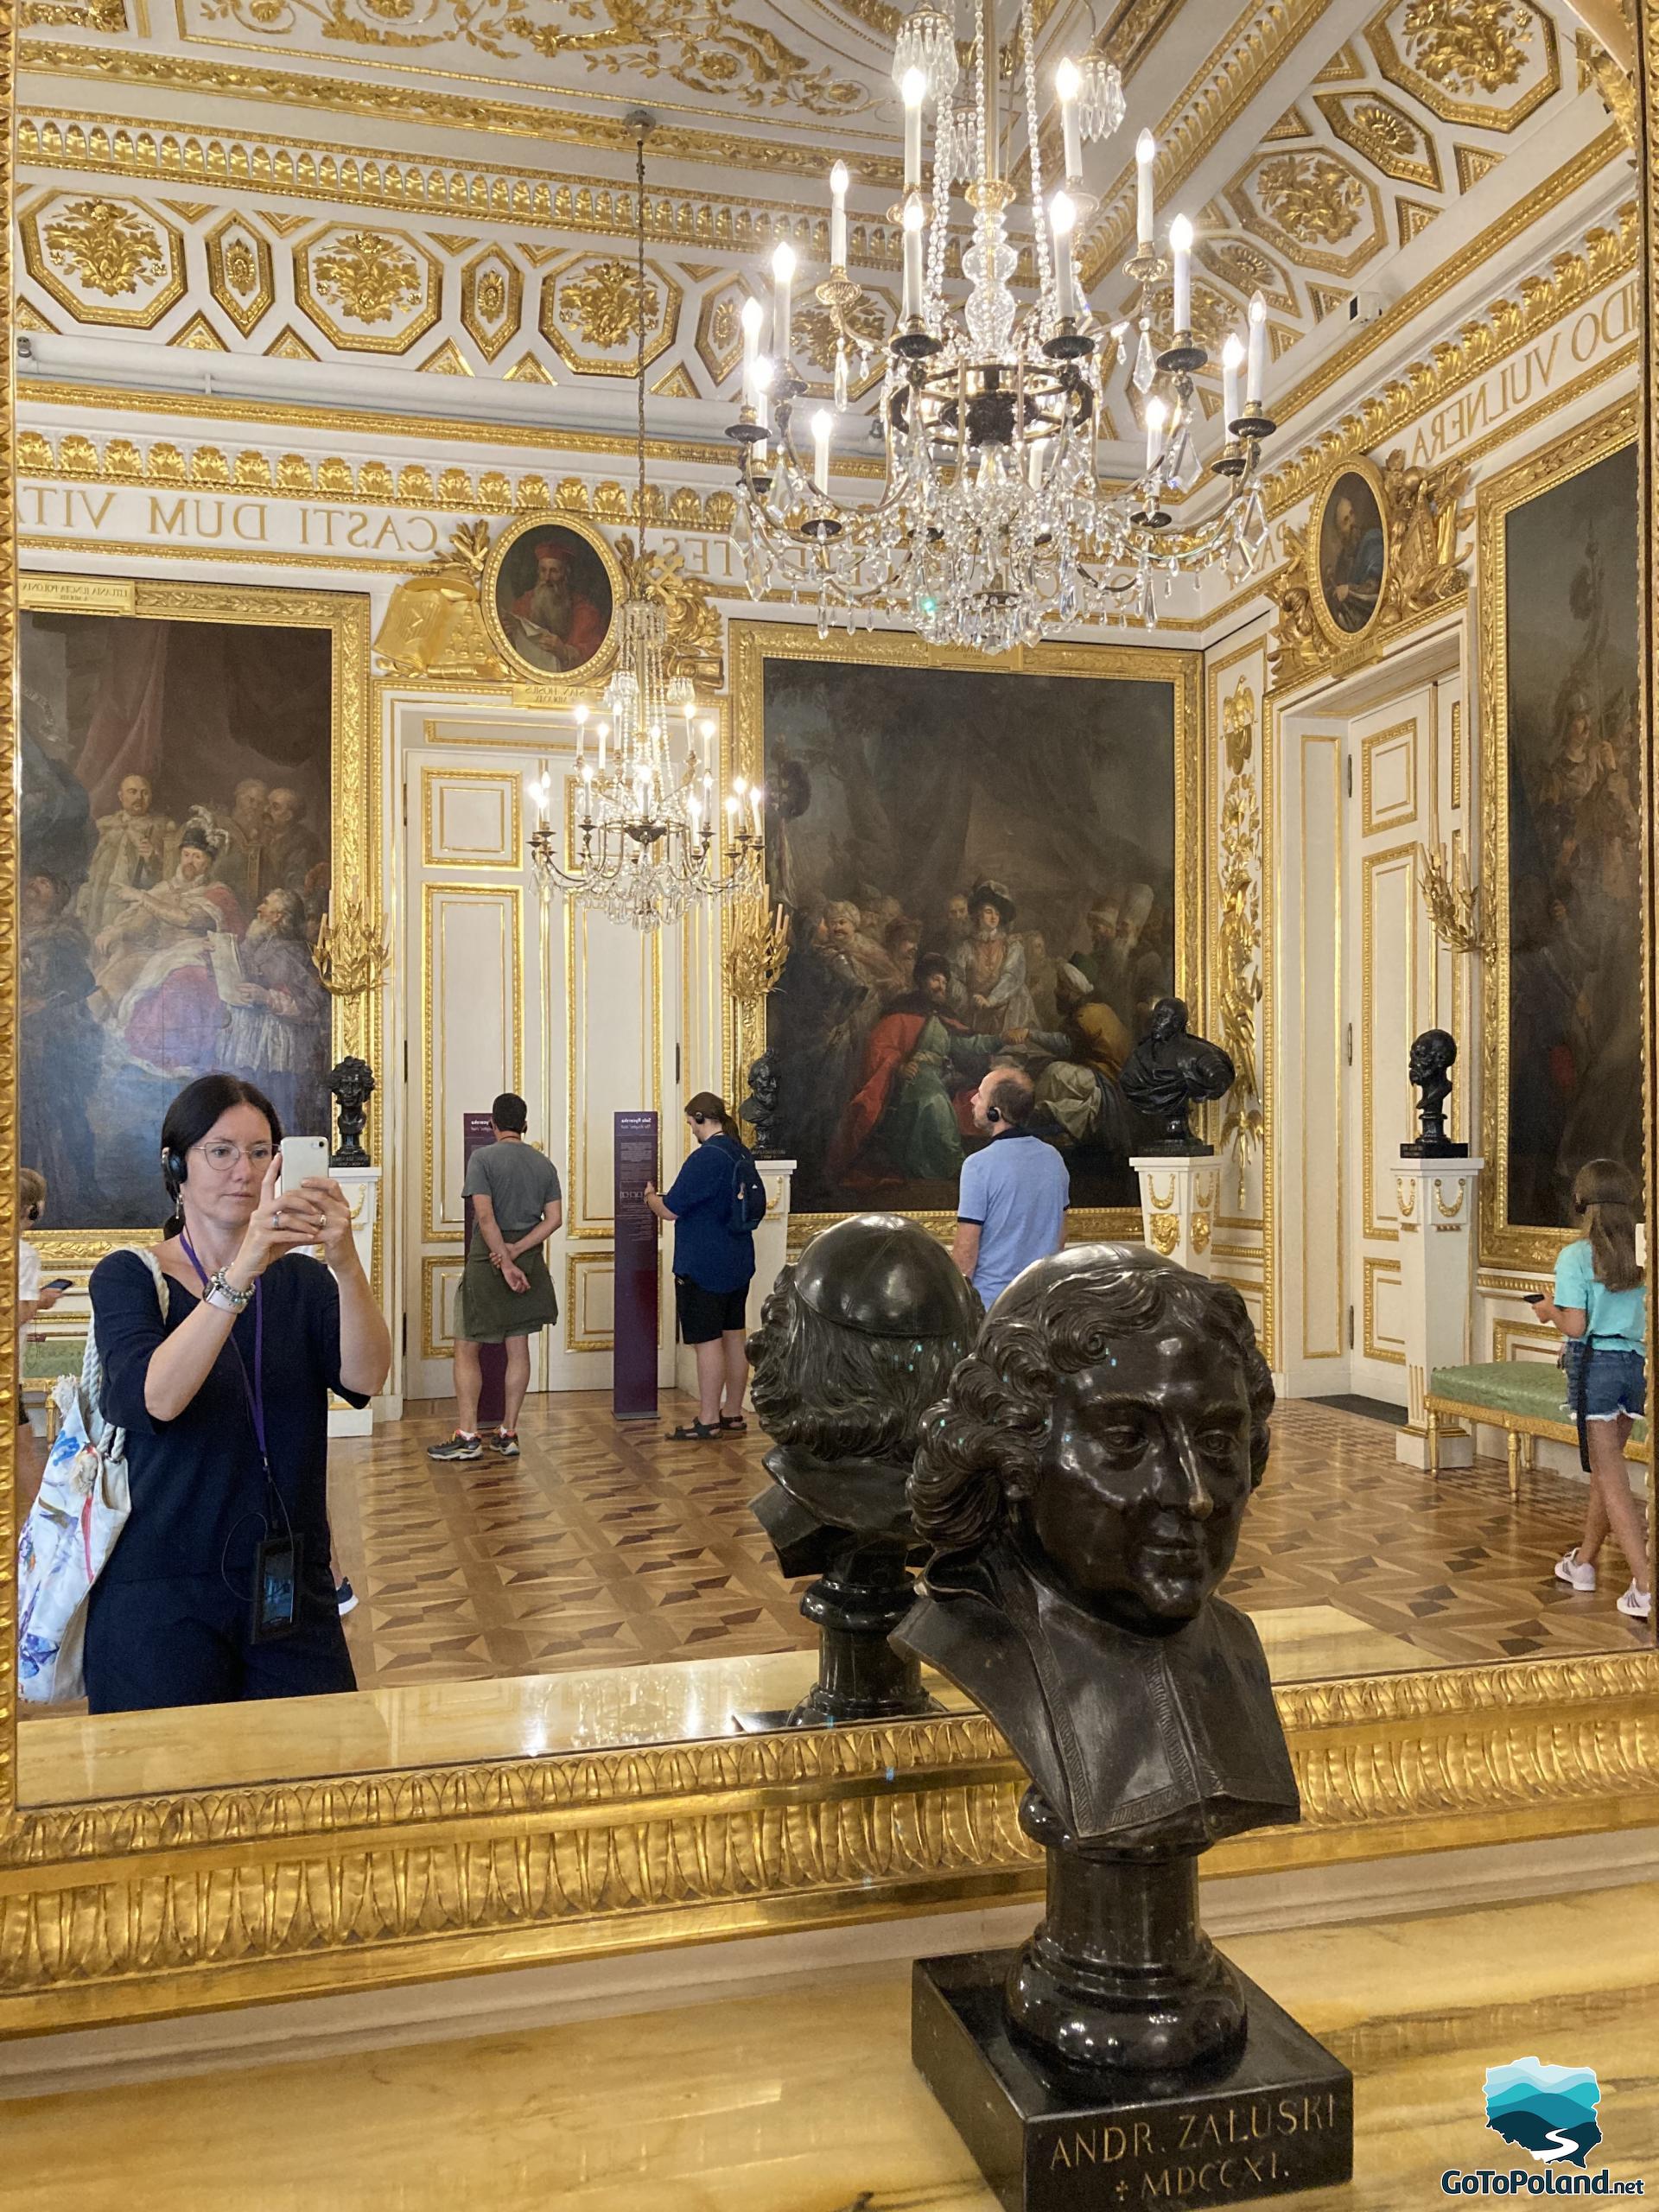 a woman is standing in front of a mirror and taking a picture looking at herself, the interior of the room with huge paintings, golden ornaments and crystal chandeliers is reflected in the mirror, a small black bust of a man stands in front of the mirror